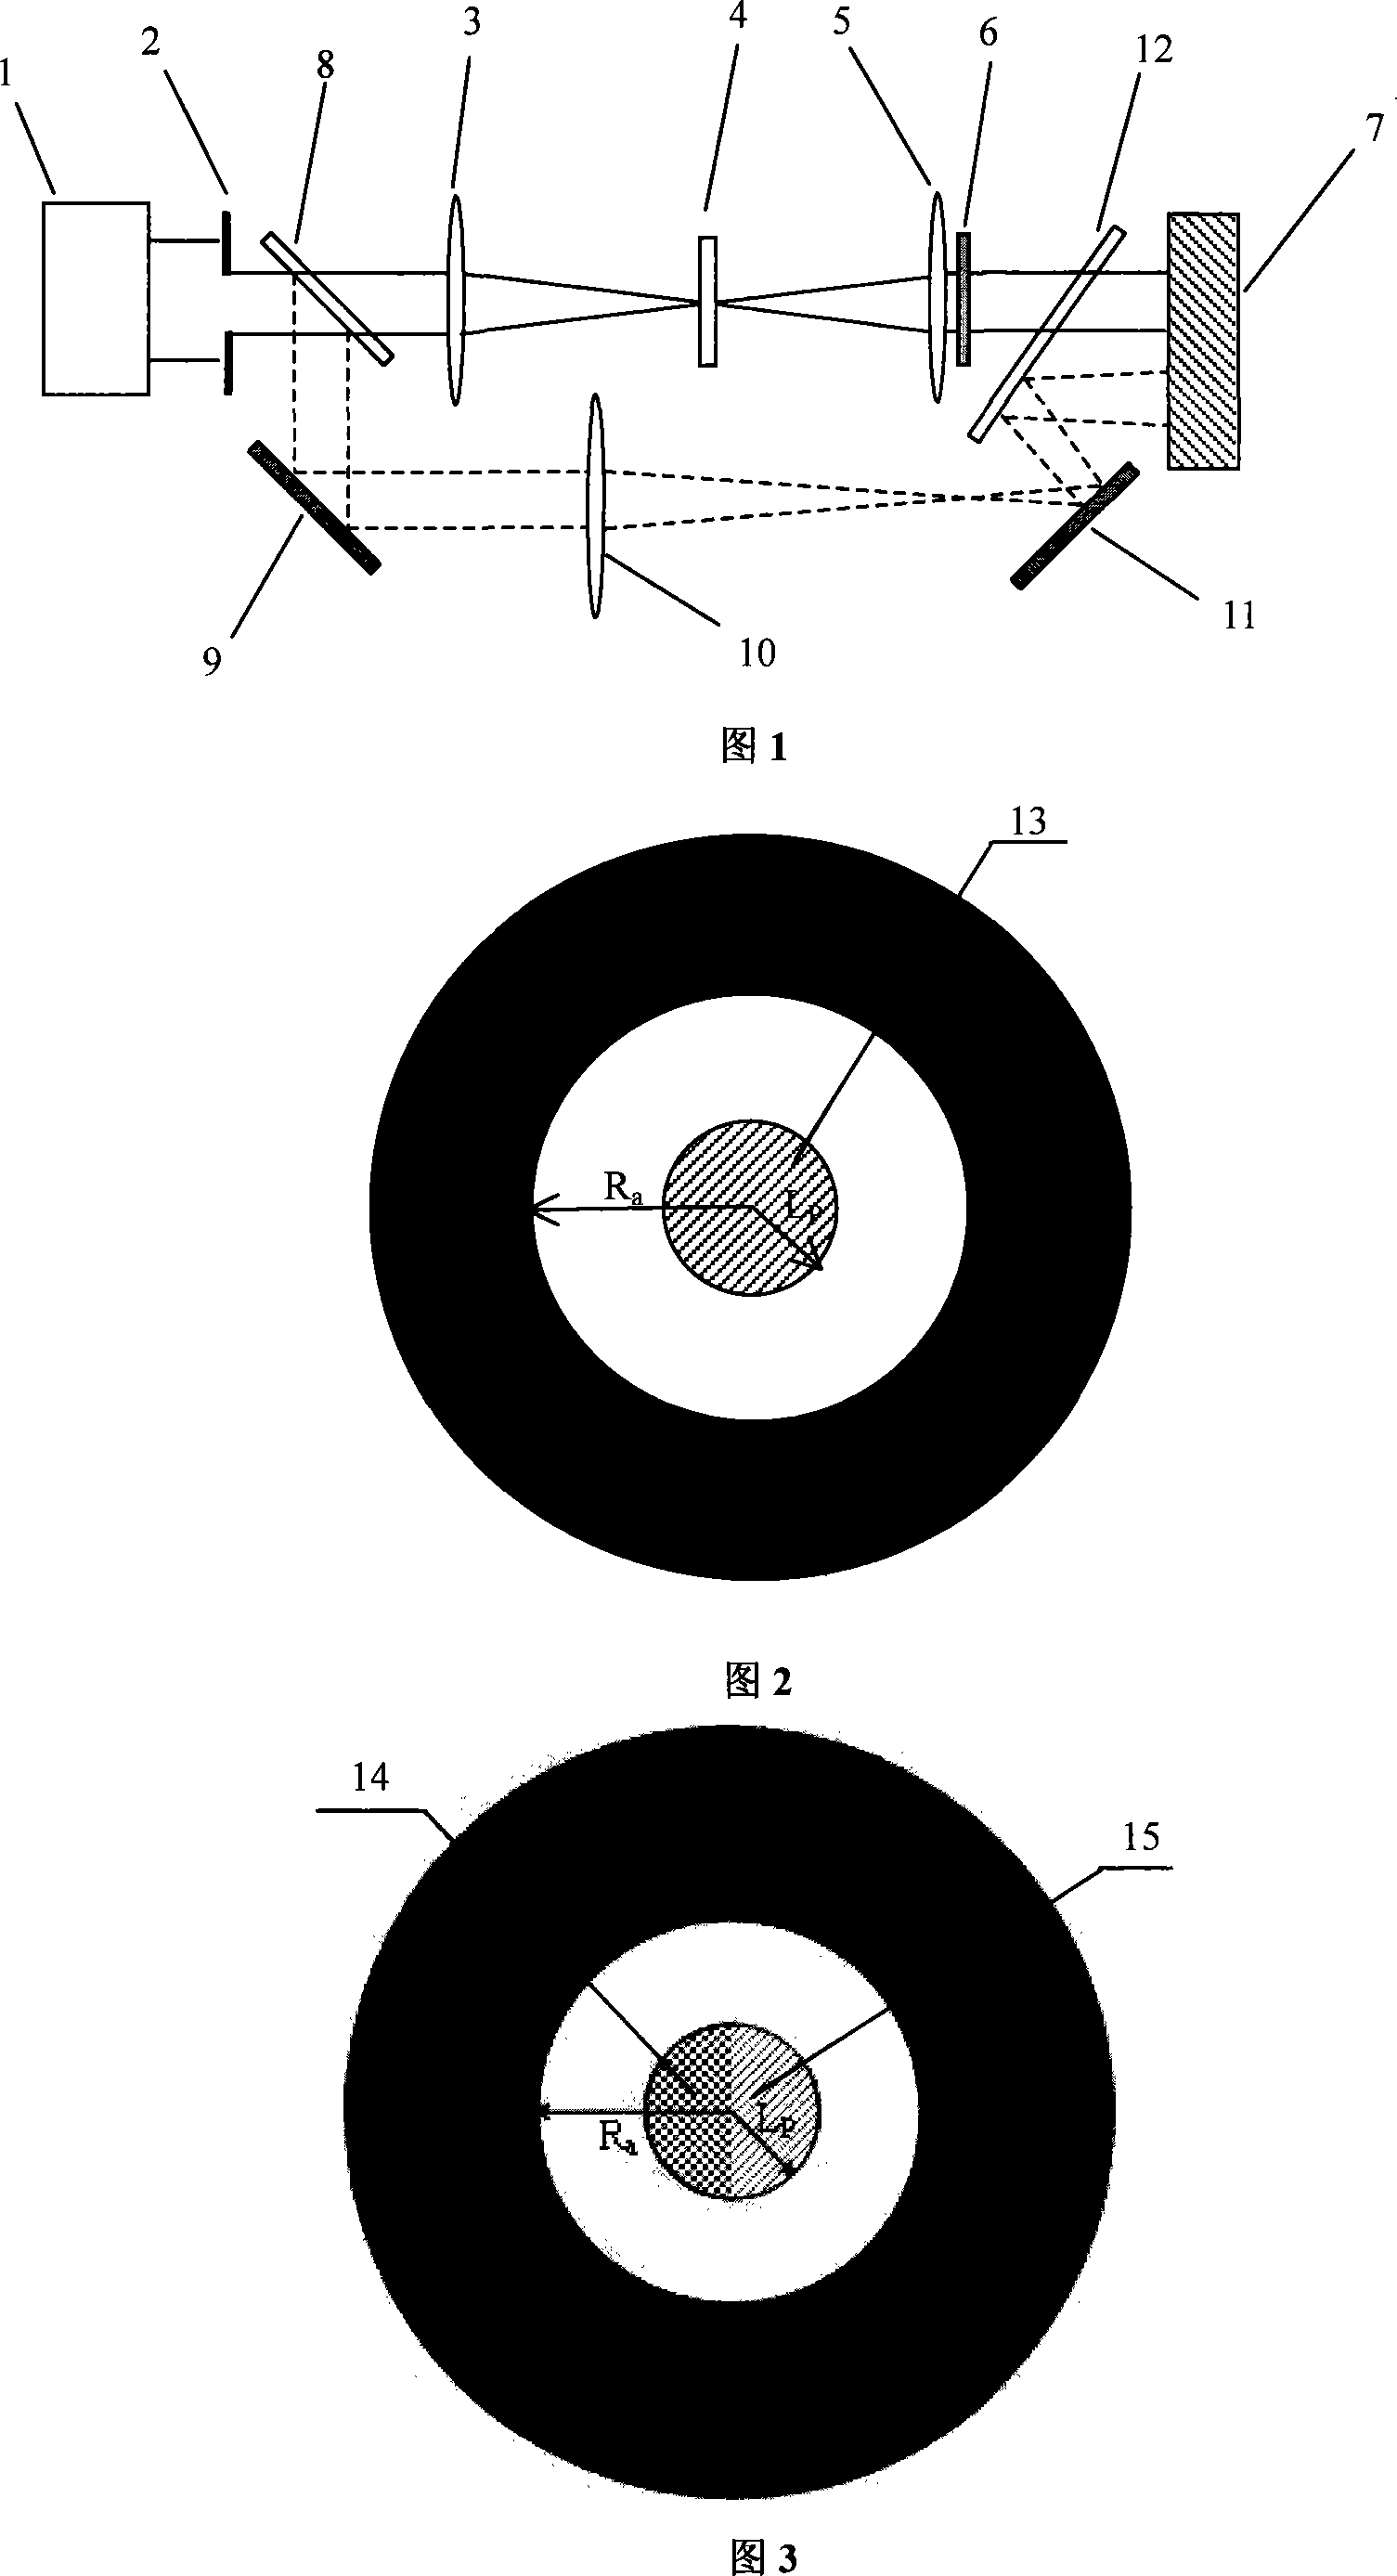 Phase diaphragm for 4f phase coherence imaging system